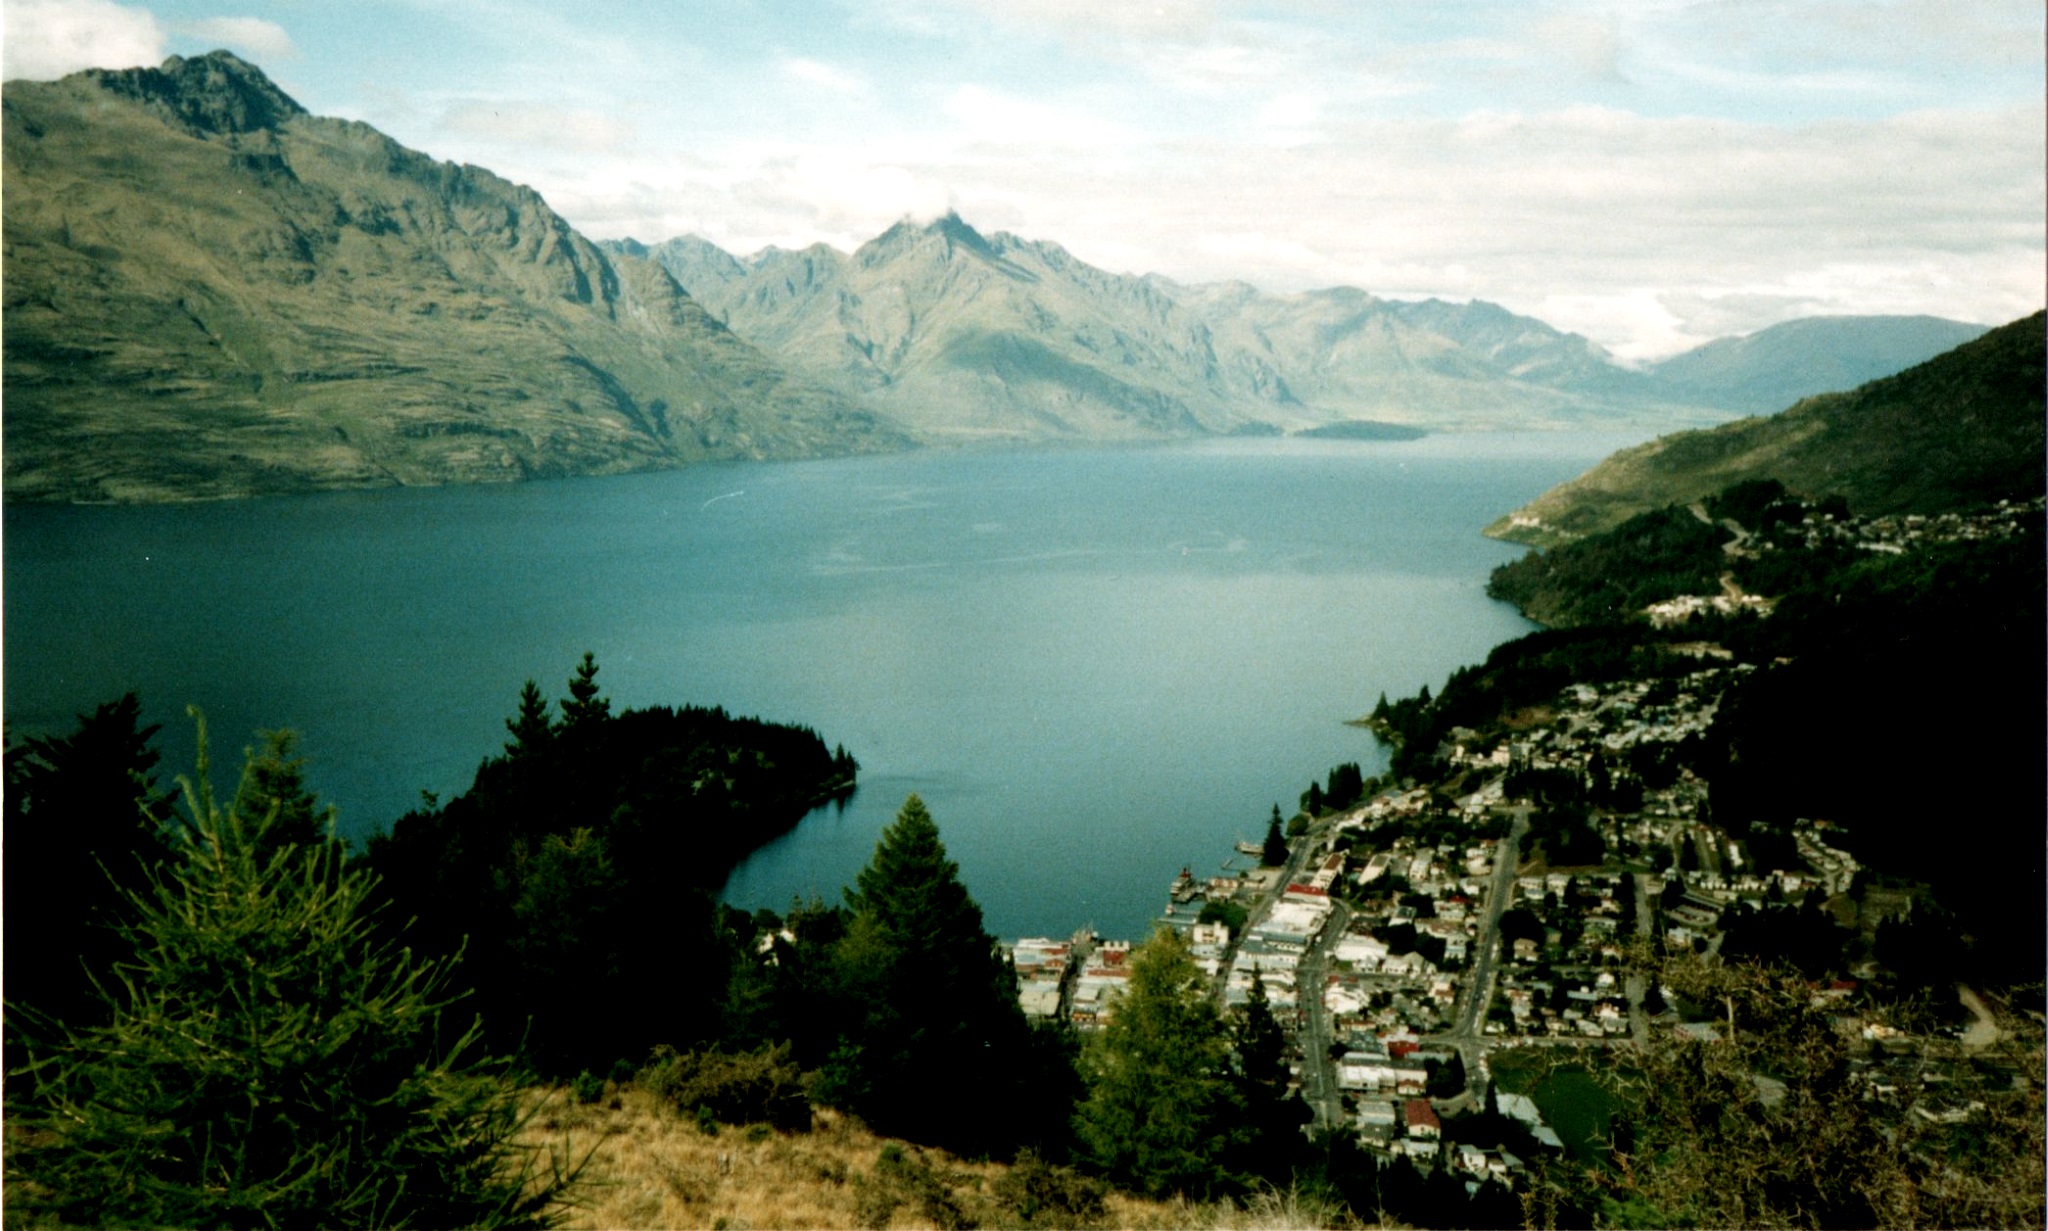 Queenstown and Lake Wakatipu in South Island of New Zealand